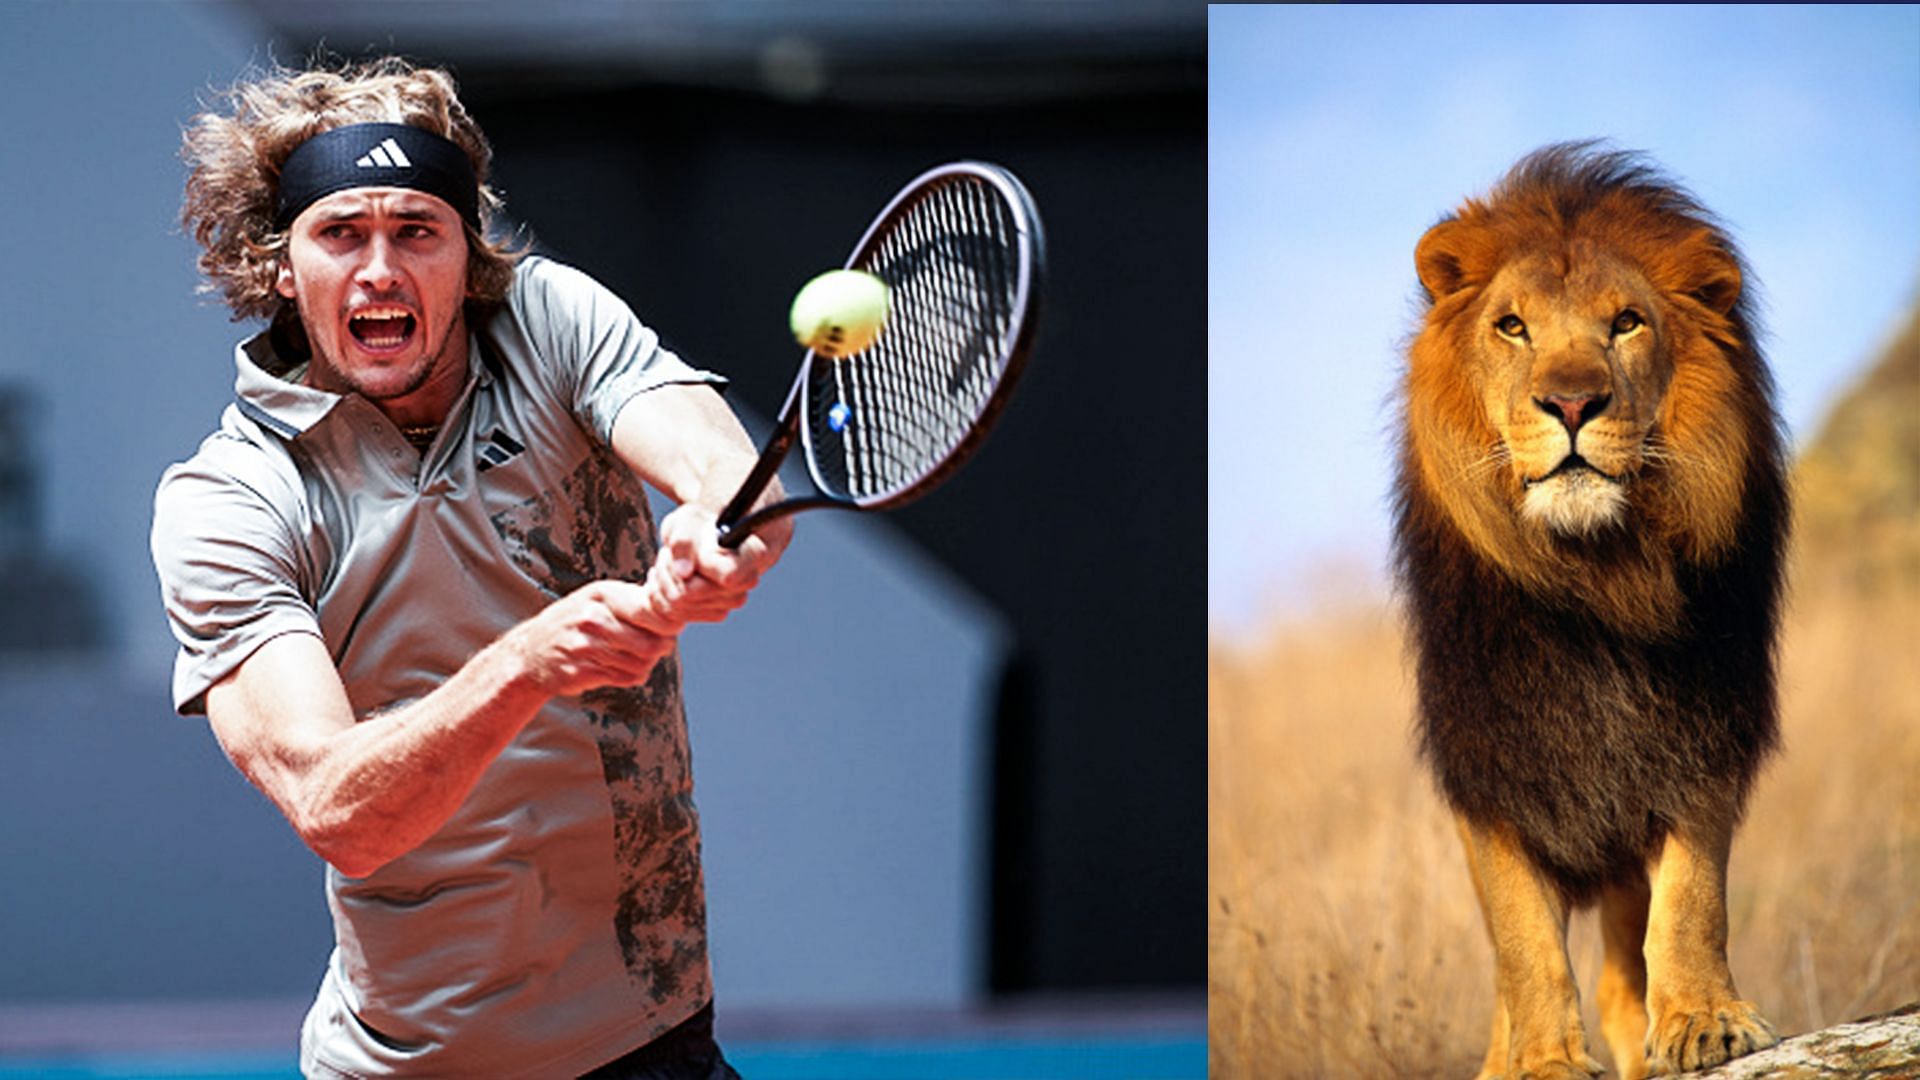 Alexander Zverev being compared to a lion by tennis fans on social media